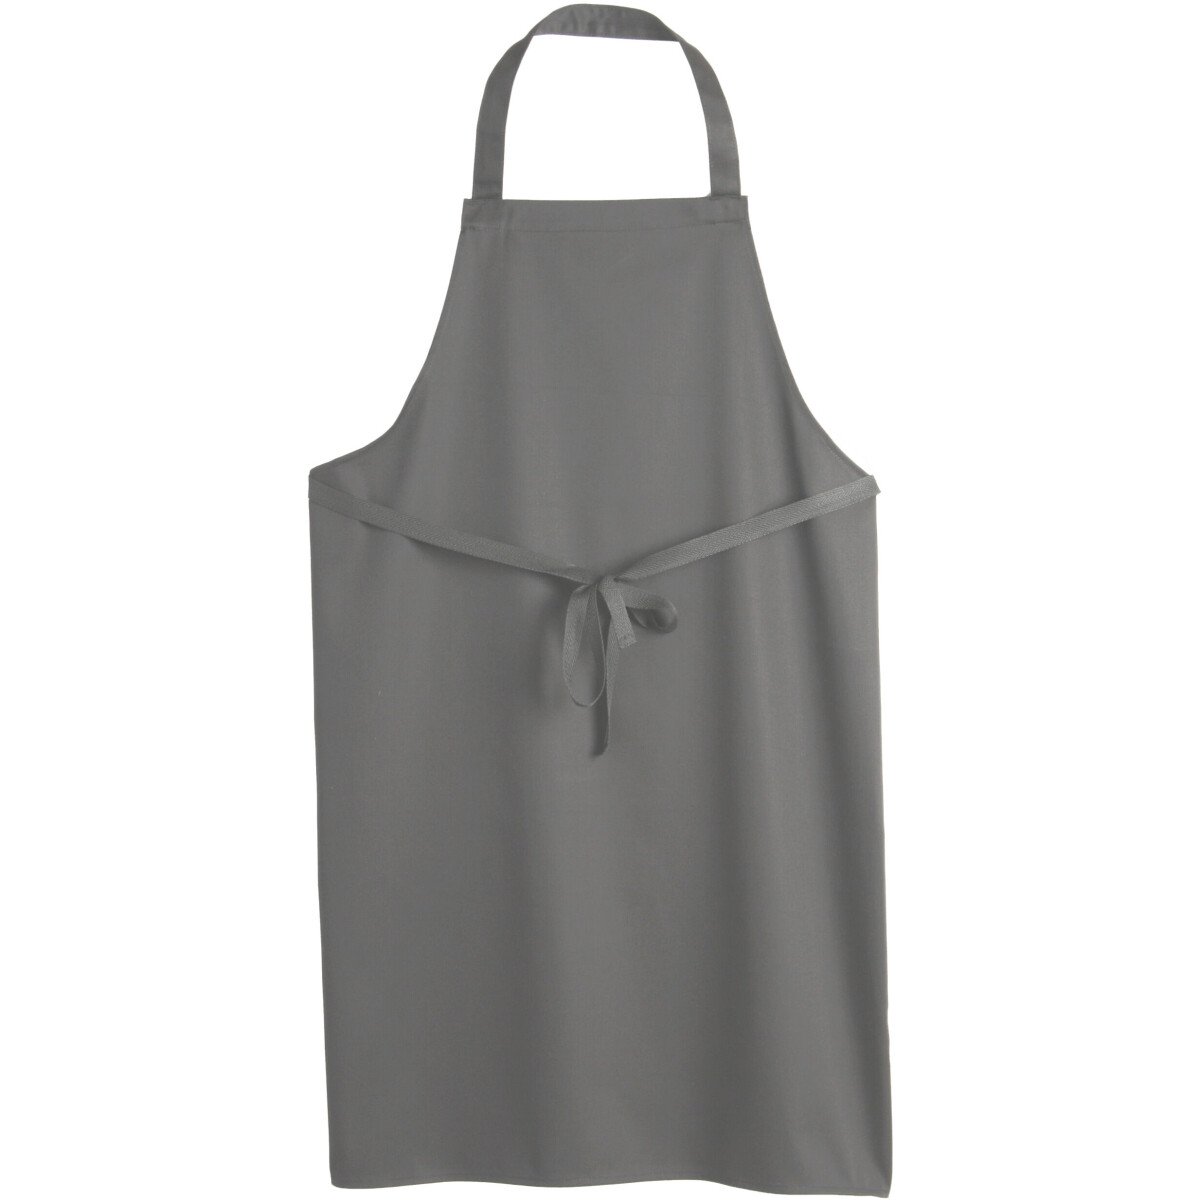 Denny DP10CNQ Low Cost Bib Apron Without Pocket - Griffin Grey